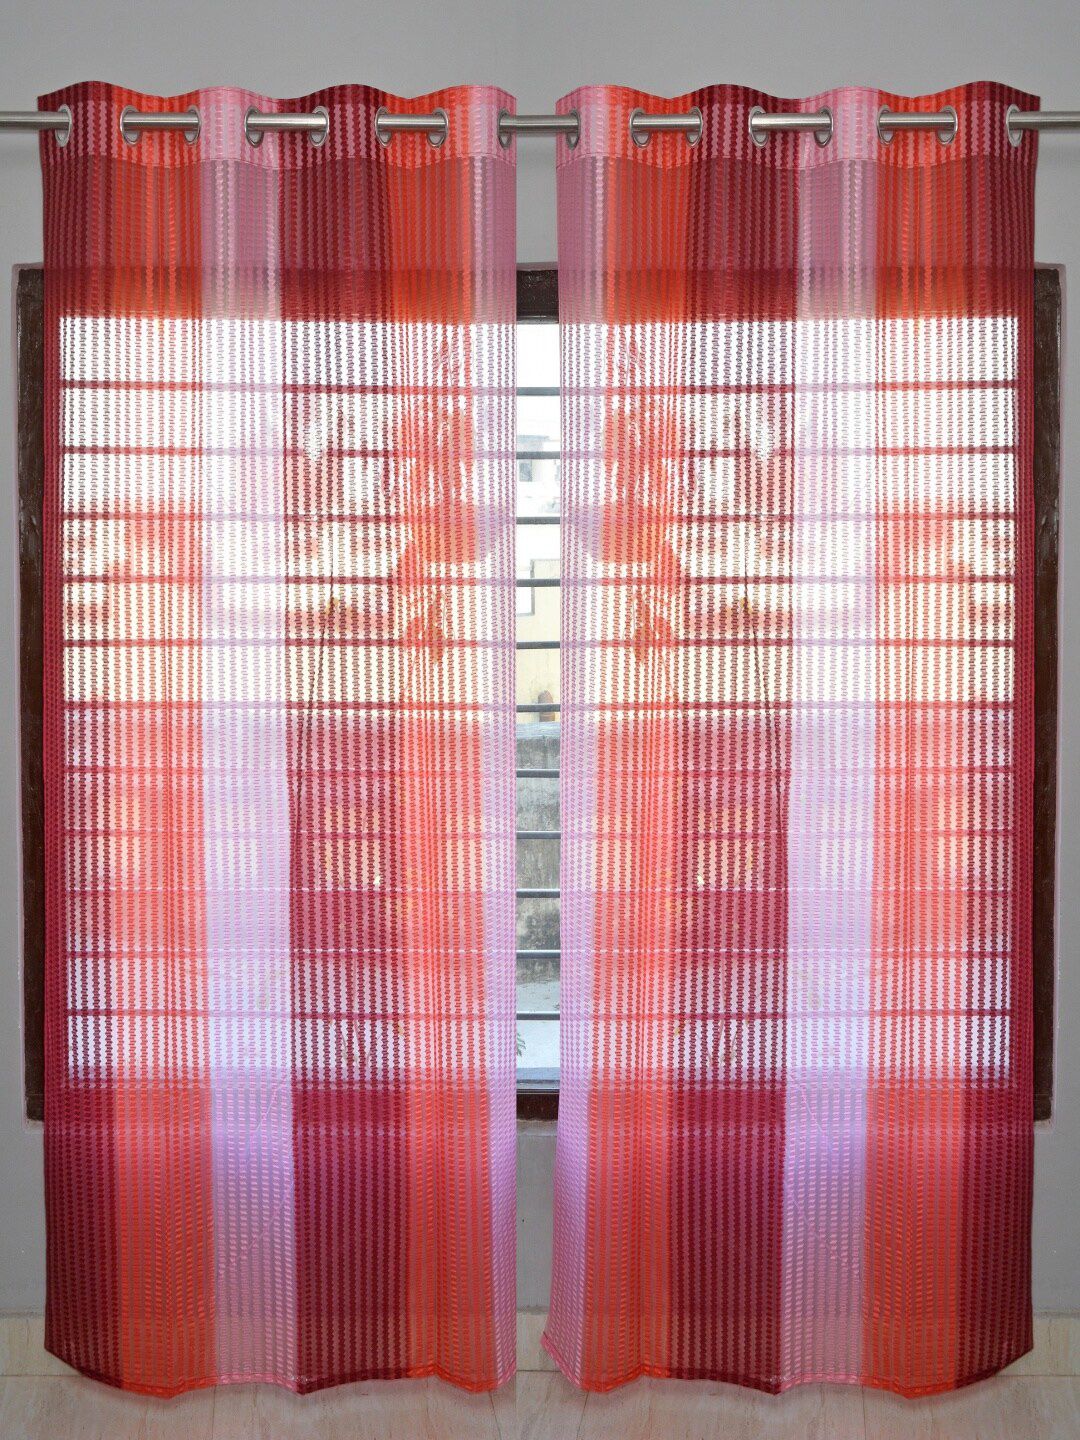 Homefab India Unisex Maroon Curtains and Sheers Price in India